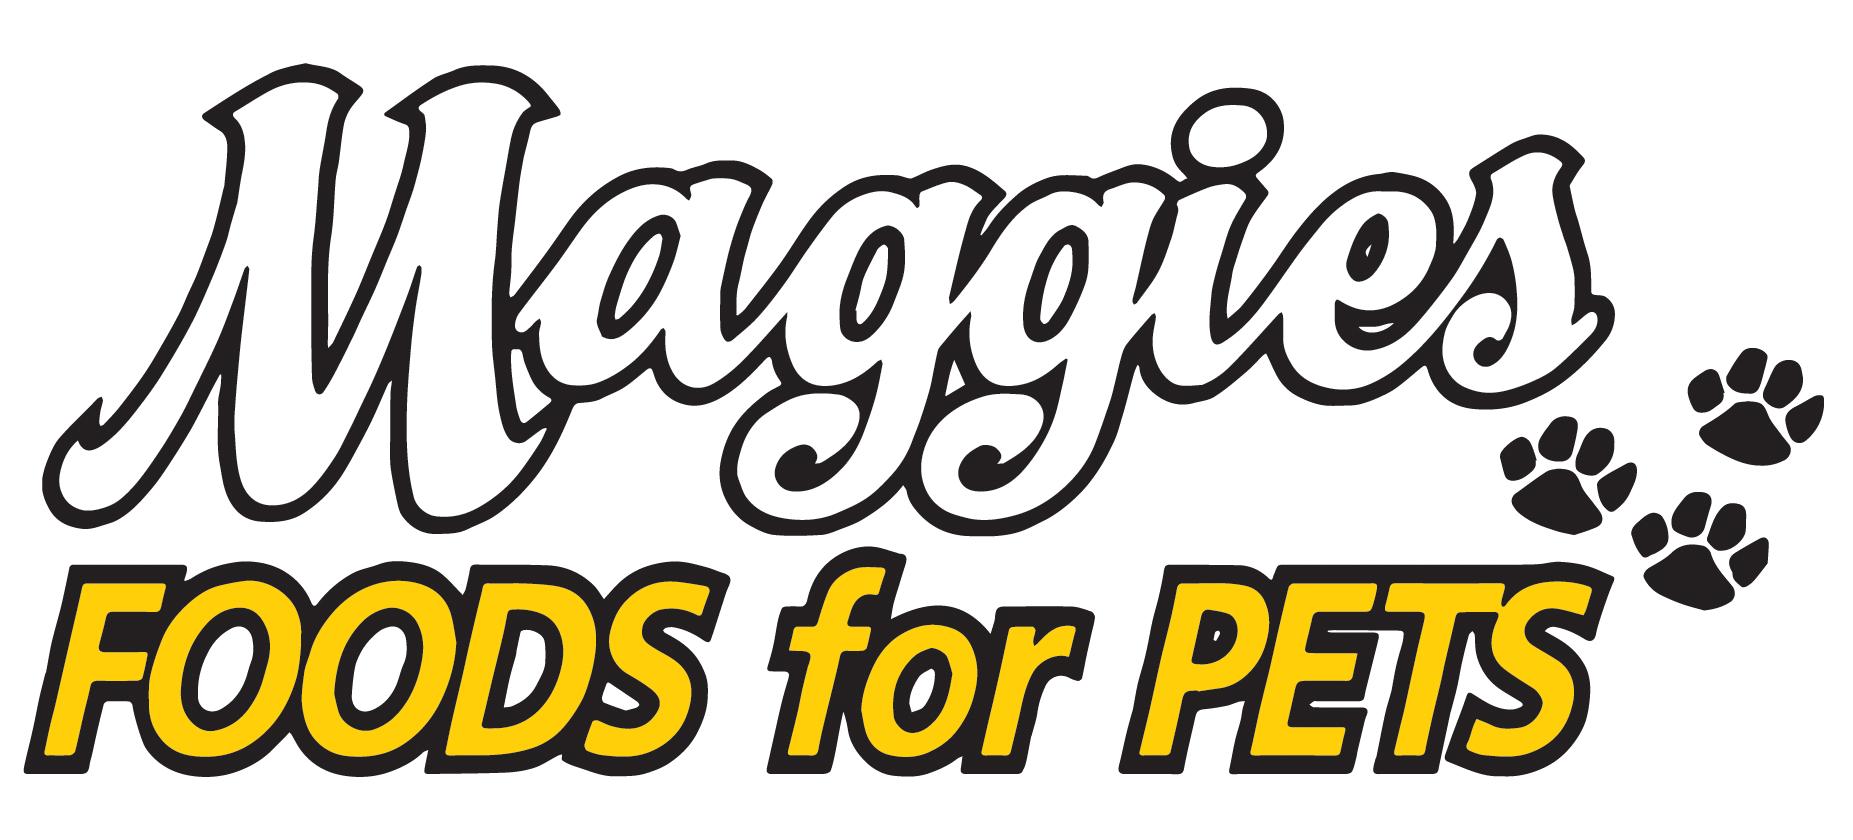 Business logo of Maggie's Foods for Pets